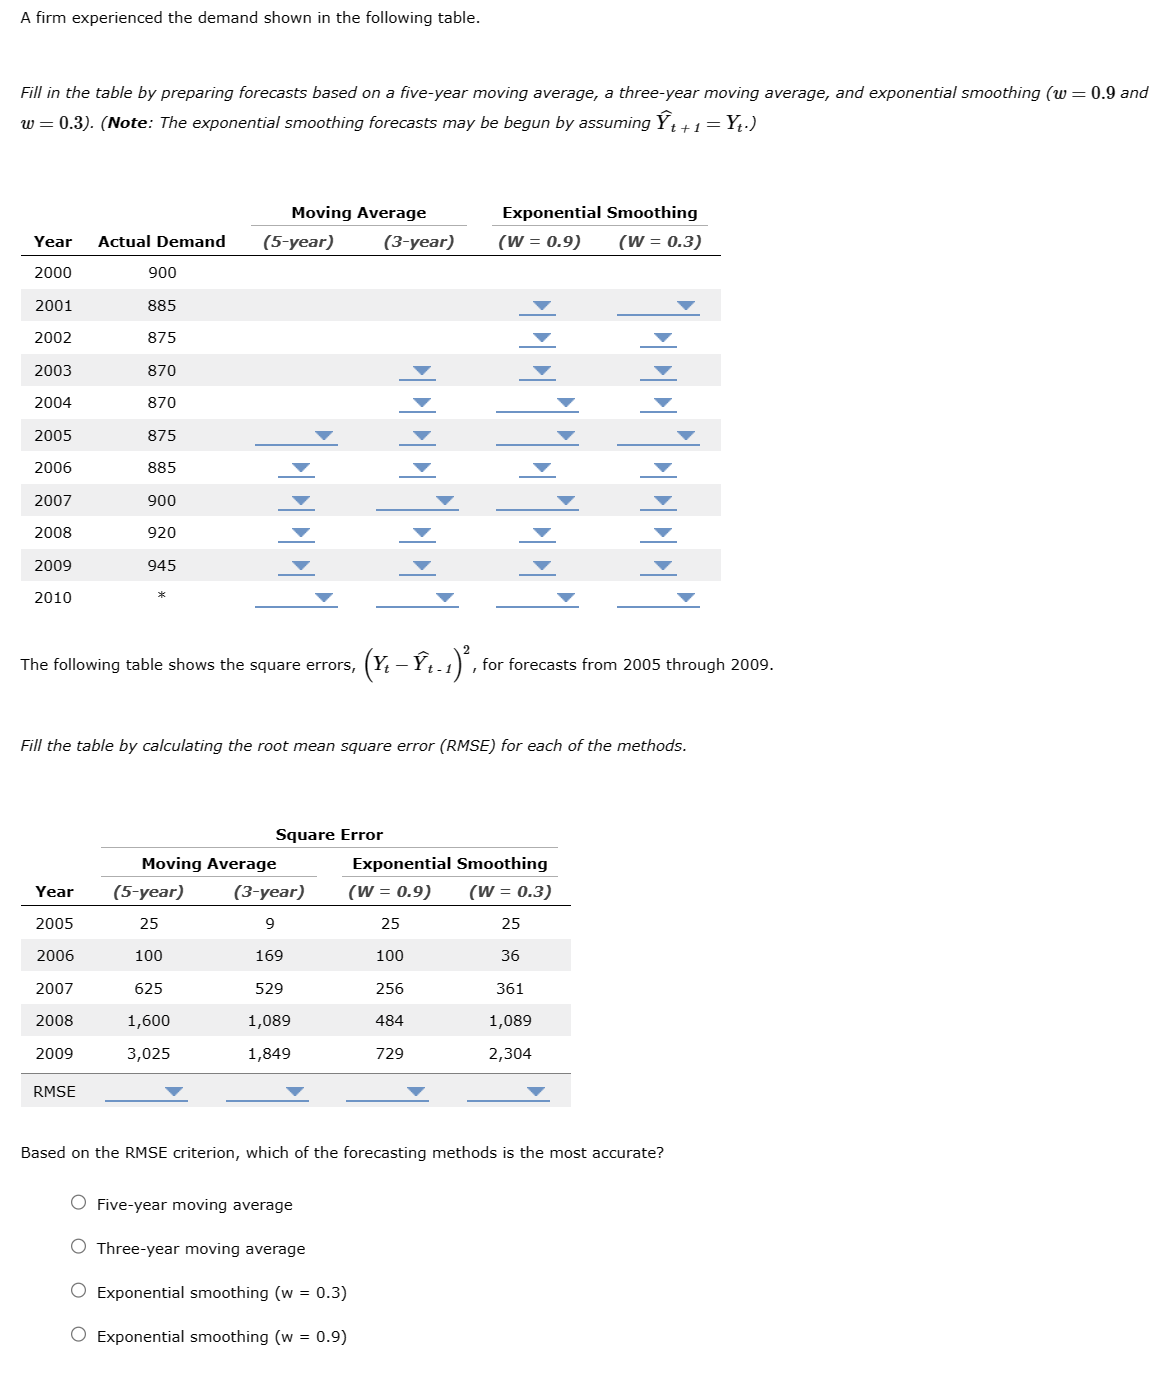 A firm experienced the demand shown in the following table.
Fill in the table by preparing forecasts based on a five-year moving average, a three-year moving average, and exponential smoothing (w = 0.9 and
w = 0.3). (Note: The exponential smoothing forecasts may be begun by assuming Ŷt + 1 = Yt.)
Year Actual Demand
2000
2001
2002
2003
2004
2005
2006
2007
2008
2009
2010
900
885
875
870
870
875
885
900
920
945
Year
2005
2006
2007
2008
2009
RMSE
The following table shows the square errors,
Moving Average
(5-year)
******
(5-year)
25
100
625
1,600
3,025
Moving Average
Square Error
Fill the table by calculating the root mean square error (RMSE) for each of the methods.
(3-year)
9
169
529
1,089
1,849
(3-year)
*******
(Y-Ý..),
O Five-year moving average
O Three-year moving average
O Exponential smoothing (w = 0.3)
O Exponential smoothing (w = 0.9)
Exponential Smoothing
(W = 0.3)
(W = 0.9)
Exponential Smoothing
(W = 0.9) (W = 0.3)
25
25
100
36
256
361
484
1,089
2,304
729
******
, for forecasts from 2005 through 2009.
Based on the RMSE criterion, which of the forecasting methods is the most accurate?